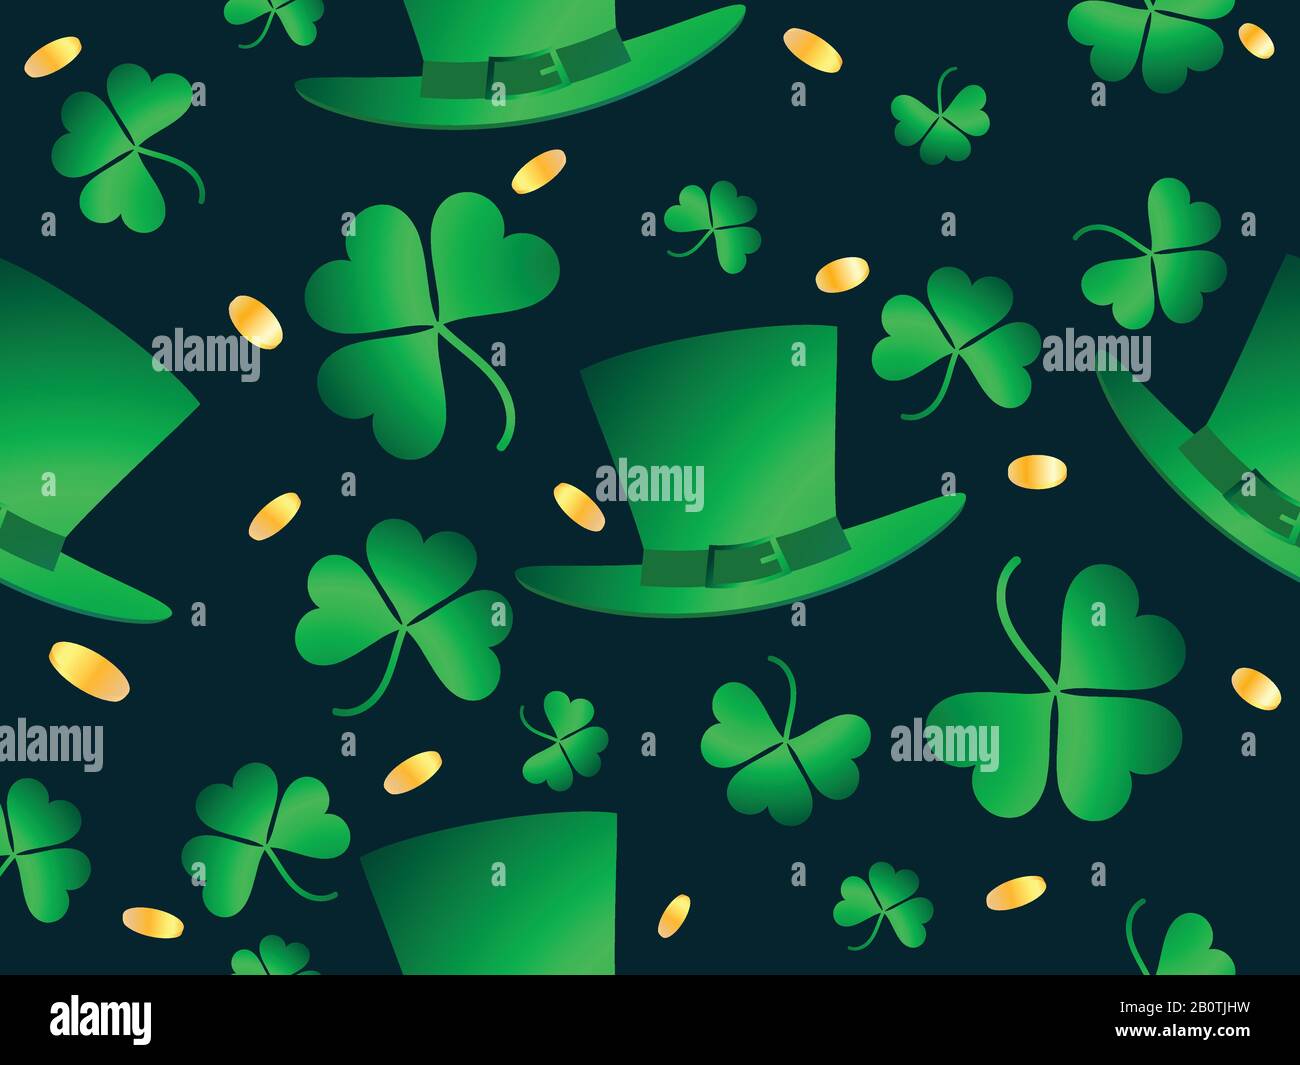 St.Patrick's day seamless pattern with clover leaves and golden